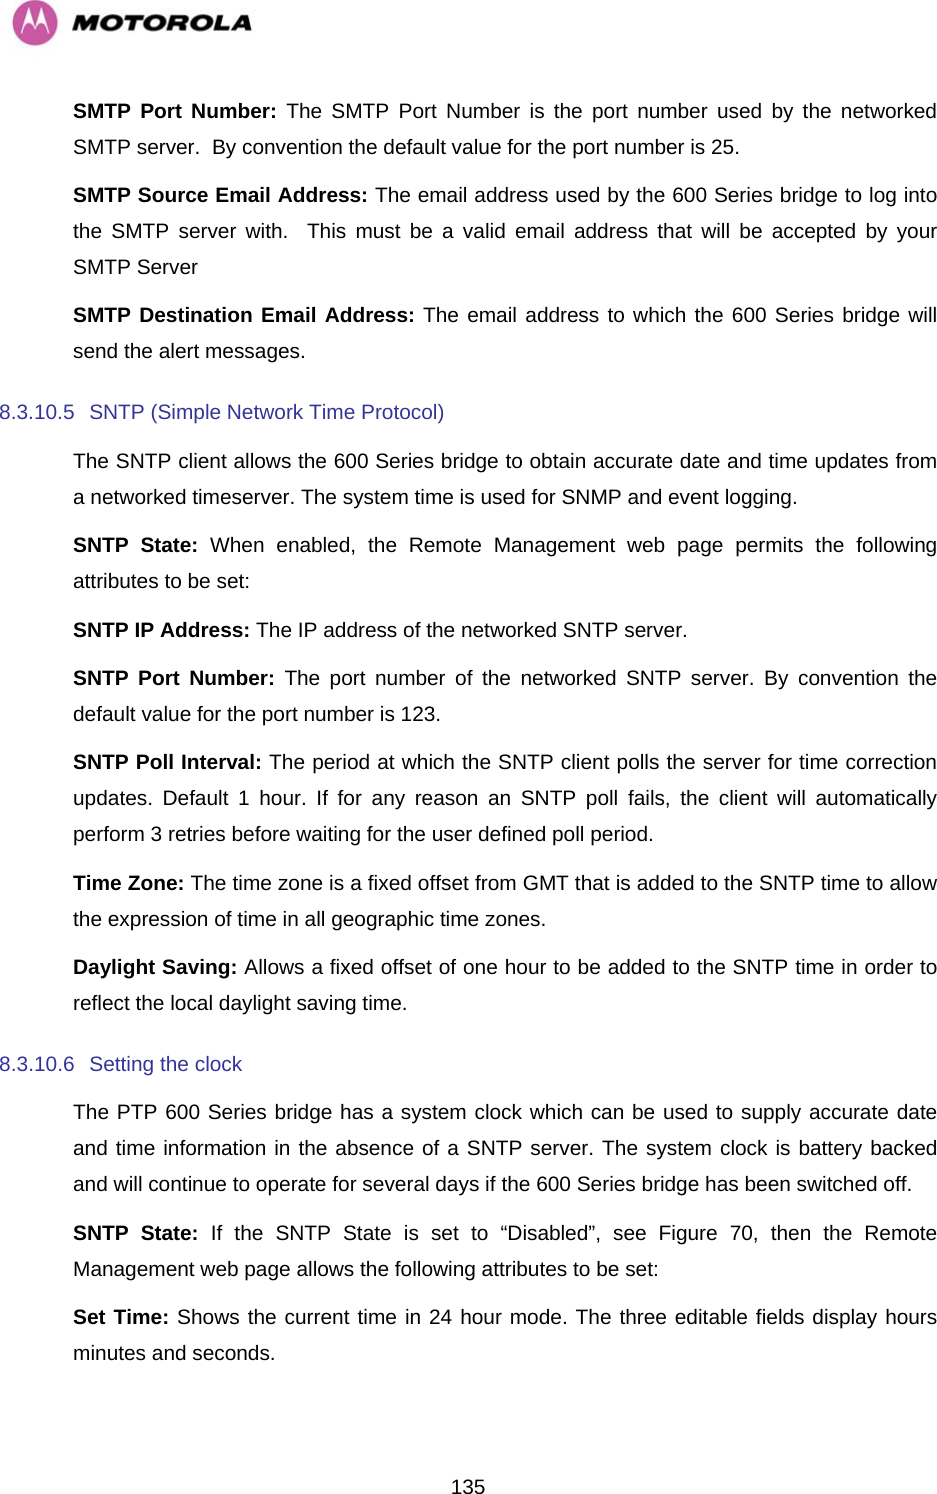   135SMTP Port Number: The SMTP Port Number is the port number used by the networked SMTP server.  By convention the default value for the port number is 25. SMTP Source Email Address: The email address used by the 600 Series bridge to log into the SMTP server with.  This must be a valid email address that will be accepted by your SMTP Server SMTP Destination Email Address: The email address to which the 600 Series bridge will send the alert messages. 8.3.10.5  SNTP (Simple Network Time Protocol) The SNTP client allows the 600 Series bridge to obtain accurate date and time updates from a networked timeserver. The system time is used for SNMP and event logging. SNTP State: When enabled, the Remote Management web page permits the following attributes to be set: SNTP IP Address: The IP address of the networked SNTP server. SNTP Port Number: The port number of the networked SNTP server. By convention the default value for the port number is 123. SNTP Poll Interval: The period at which the SNTP client polls the server for time correction updates. Default 1 hour. If for any reason an SNTP poll fails, the client will automatically perform 3 retries before waiting for the user defined poll period. Time Zone: The time zone is a fixed offset from GMT that is added to the SNTP time to allow the expression of time in all geographic time zones. Daylight Saving: Allows a fixed offset of one hour to be added to the SNTP time in order to reflect the local daylight saving time. 8.3.10.6  Setting the clock  The PTP 600 Series bridge has a system clock which can be used to supply accurate date and time information in the absence of a SNTP server. The system clock is battery backed and will continue to operate for several days if the 600 Series bridge has been switched off. SNTP State: If the SNTP State is set to “Disabled”, see Figure 70, then the Remote Management web page allows the following attributes to be set: Set Time: Shows the current time in 24 hour mode. The three editable fields display hours minutes and seconds. 